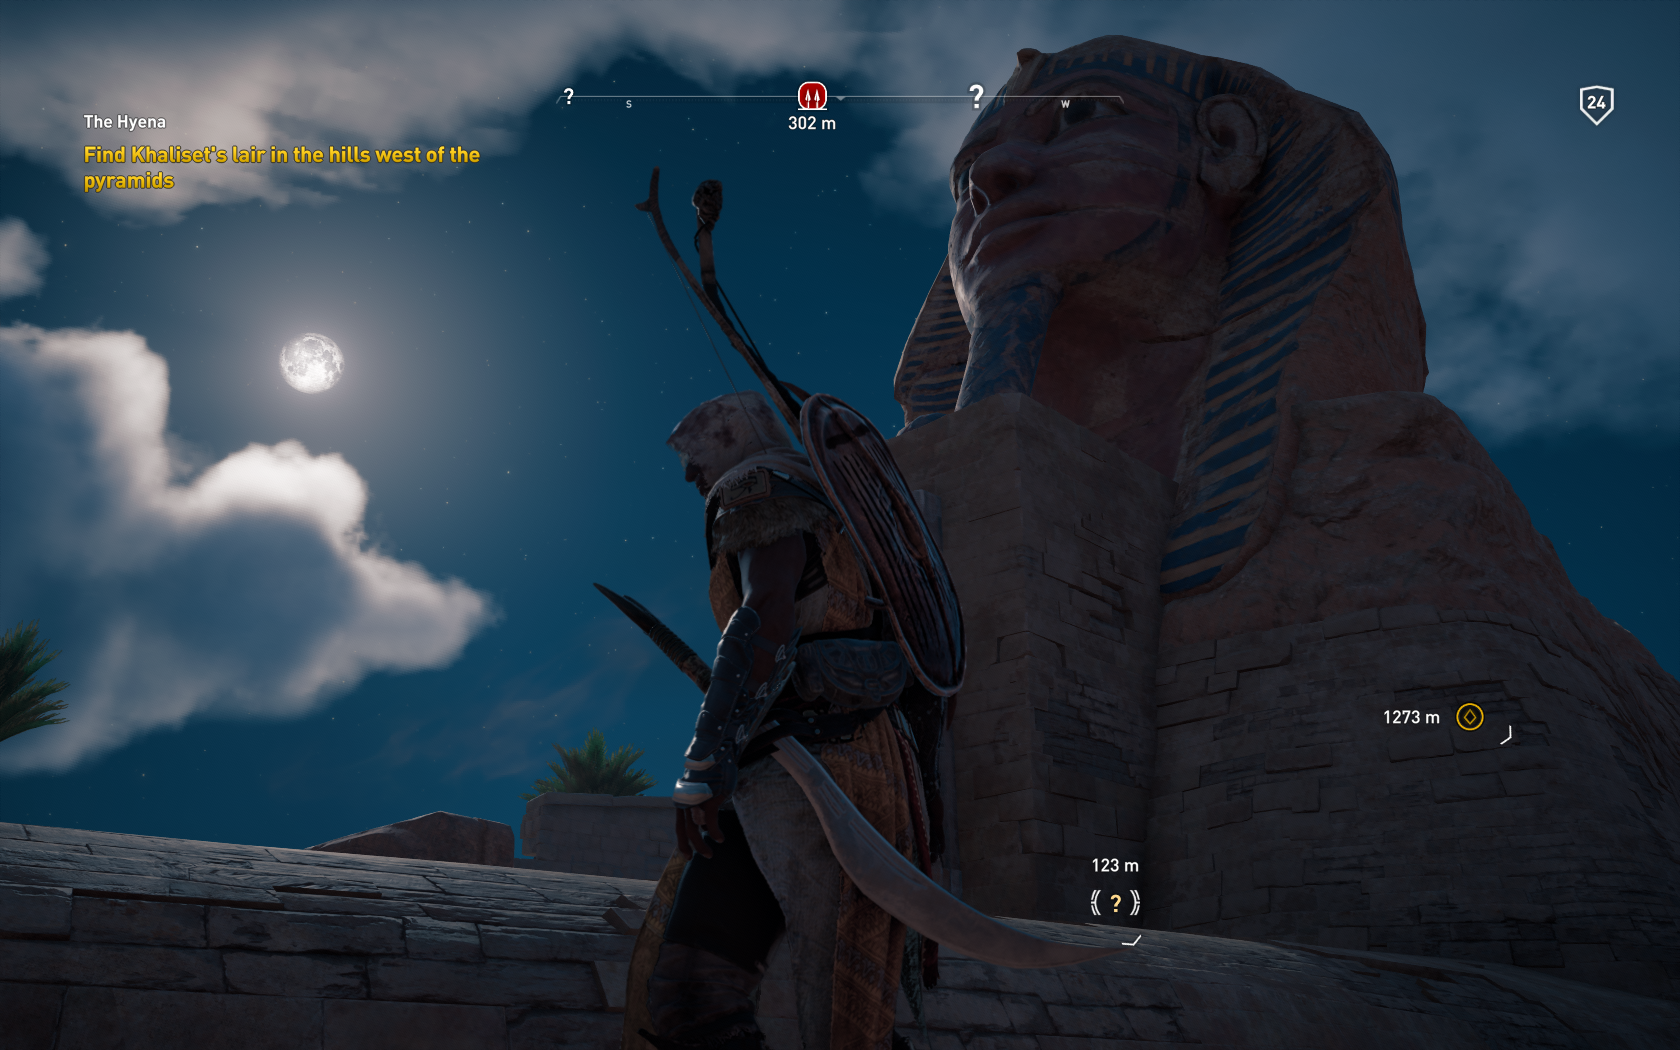 Assassins Creed Valhalla Review on PC — Rigged for Epic